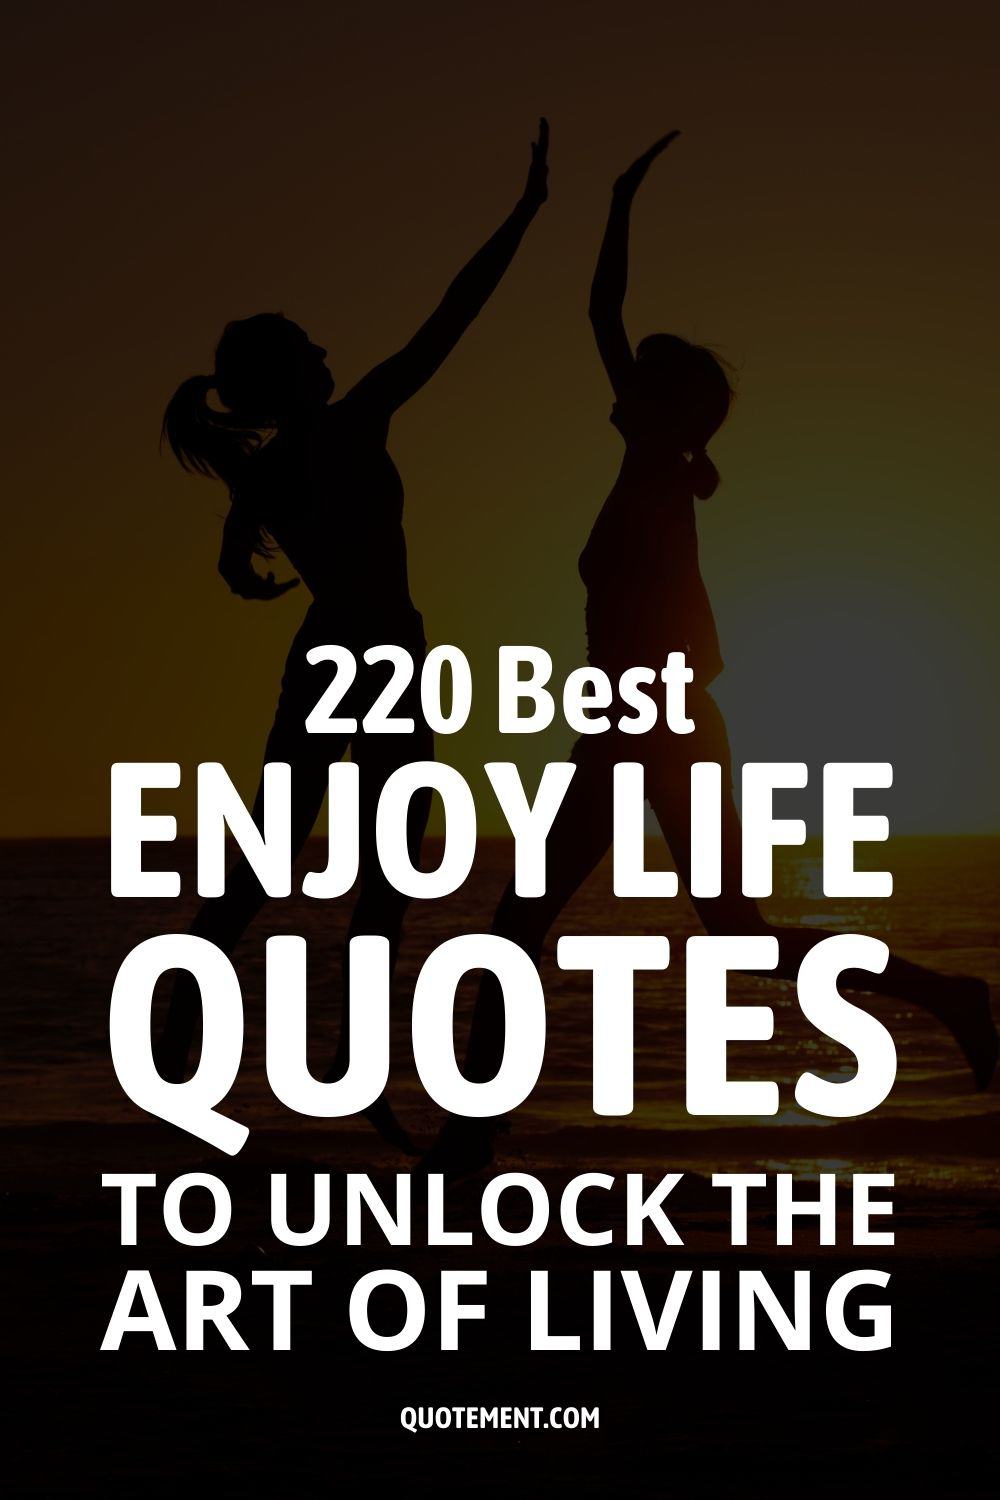 220 Best Enjoy Life Quotes To Unlock The Art Of Living
